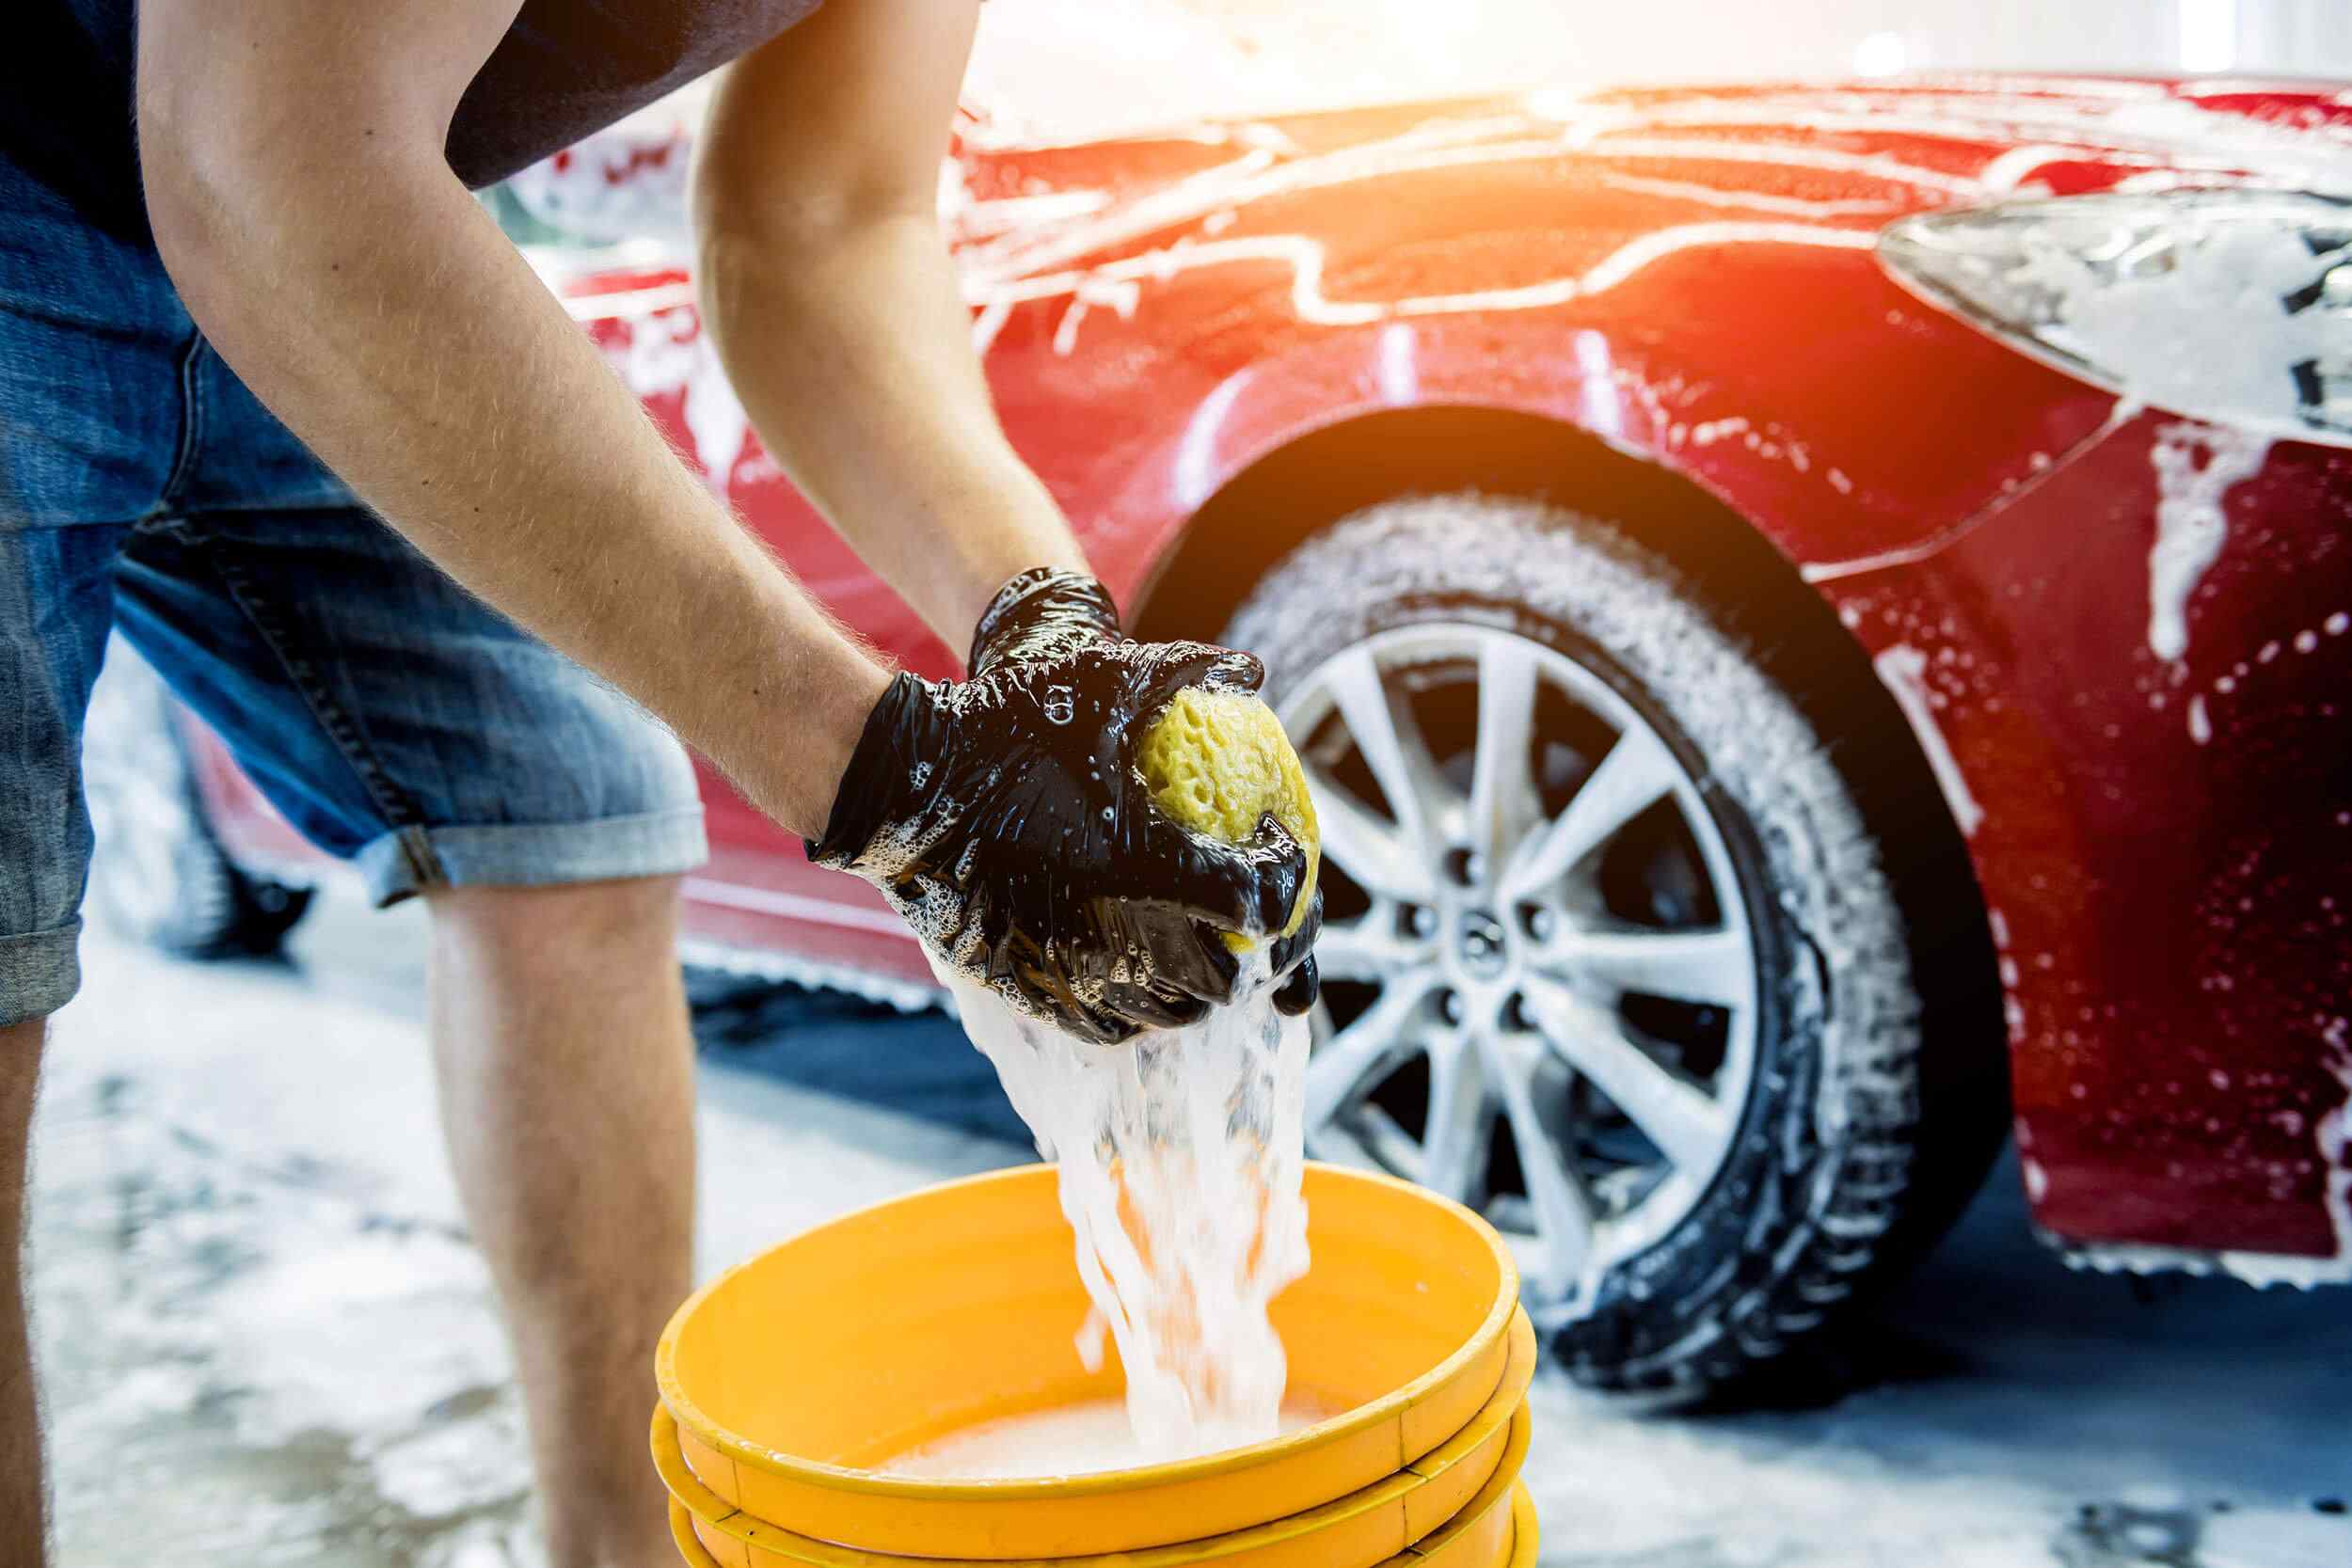 How to wash your car